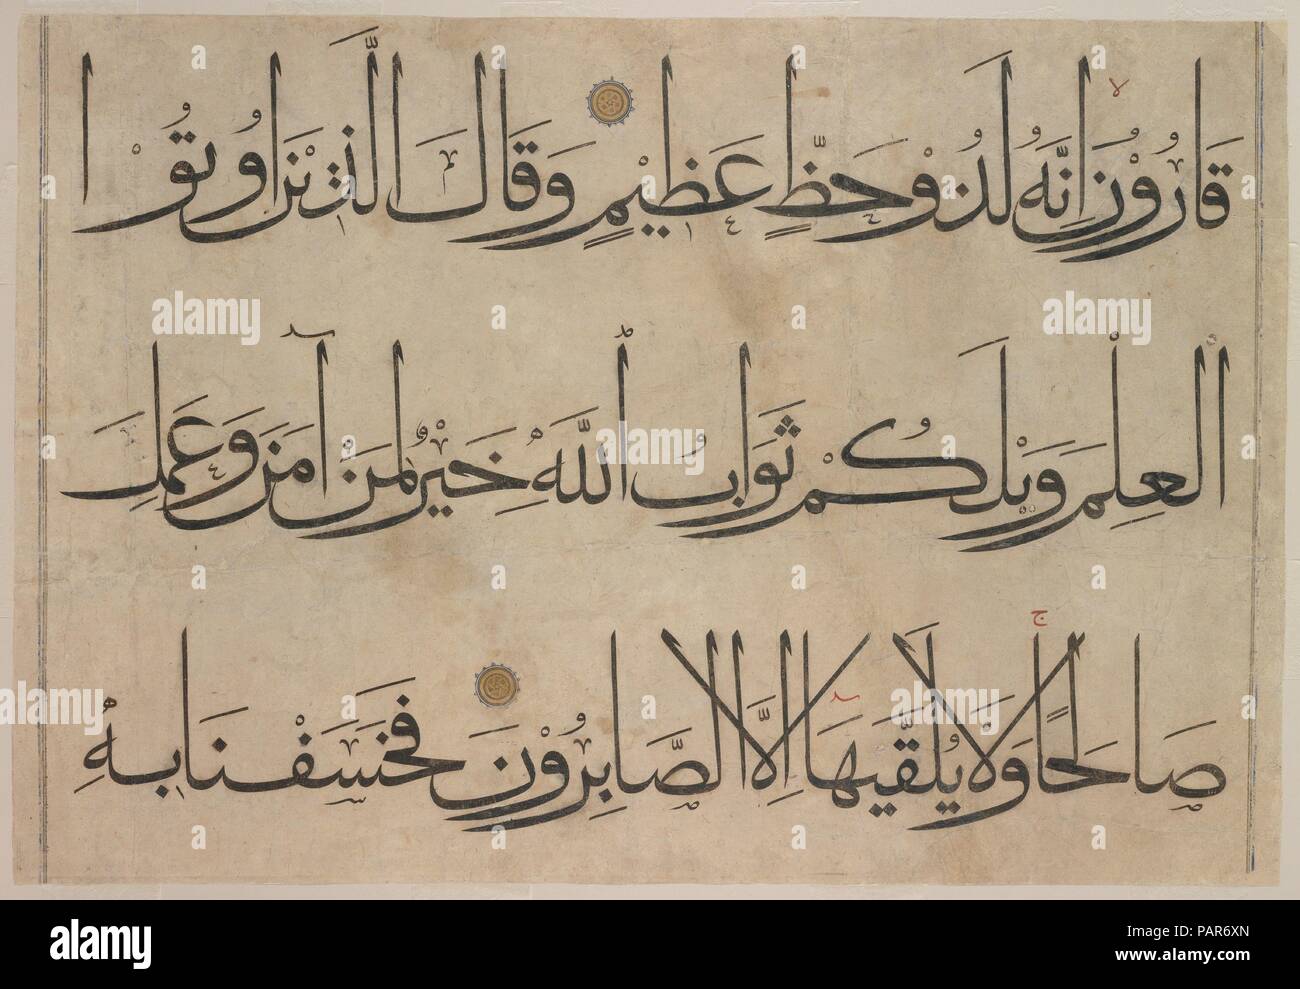 Section from a Qur'an Manuscript. Calligrapher: `Umar Aqta'. Dimensions: H. 28 3/4 in. (73.0 cm)  W. 42 in. (106.7 cm). Date: late 14th-early 15th century (before 1405).  This fragment of a page comes from one of the largest copies of the Qur'an ever produced. Each line of script, written in the muhaqqaq style, is over three feet long, and each page was originally over seven feet tall. This page probably comes from a gigantic Qur'an that the calligrapher 'Umar Aqta' wrote for the ruler Timur (Tamerlane, d. 1405). Apparently Timur was unimpressed after 'Umar Aqta' wrote a Qur'an so small that i Stock Photo